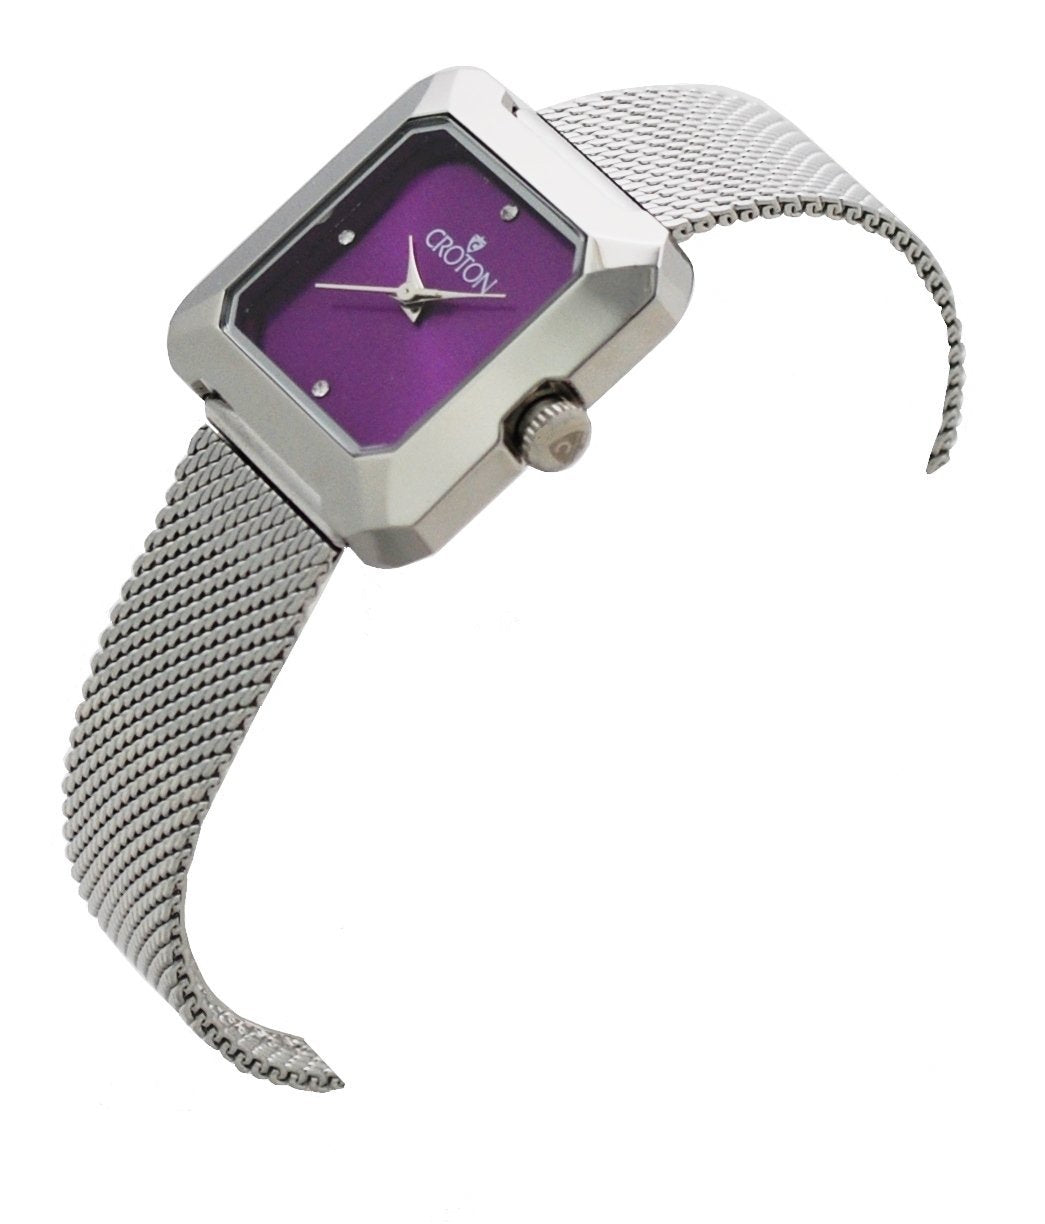 Ladies All Stainless Steel Silvertone Mesh Bracelet Watch with Purple Dial - CROTON GROUP